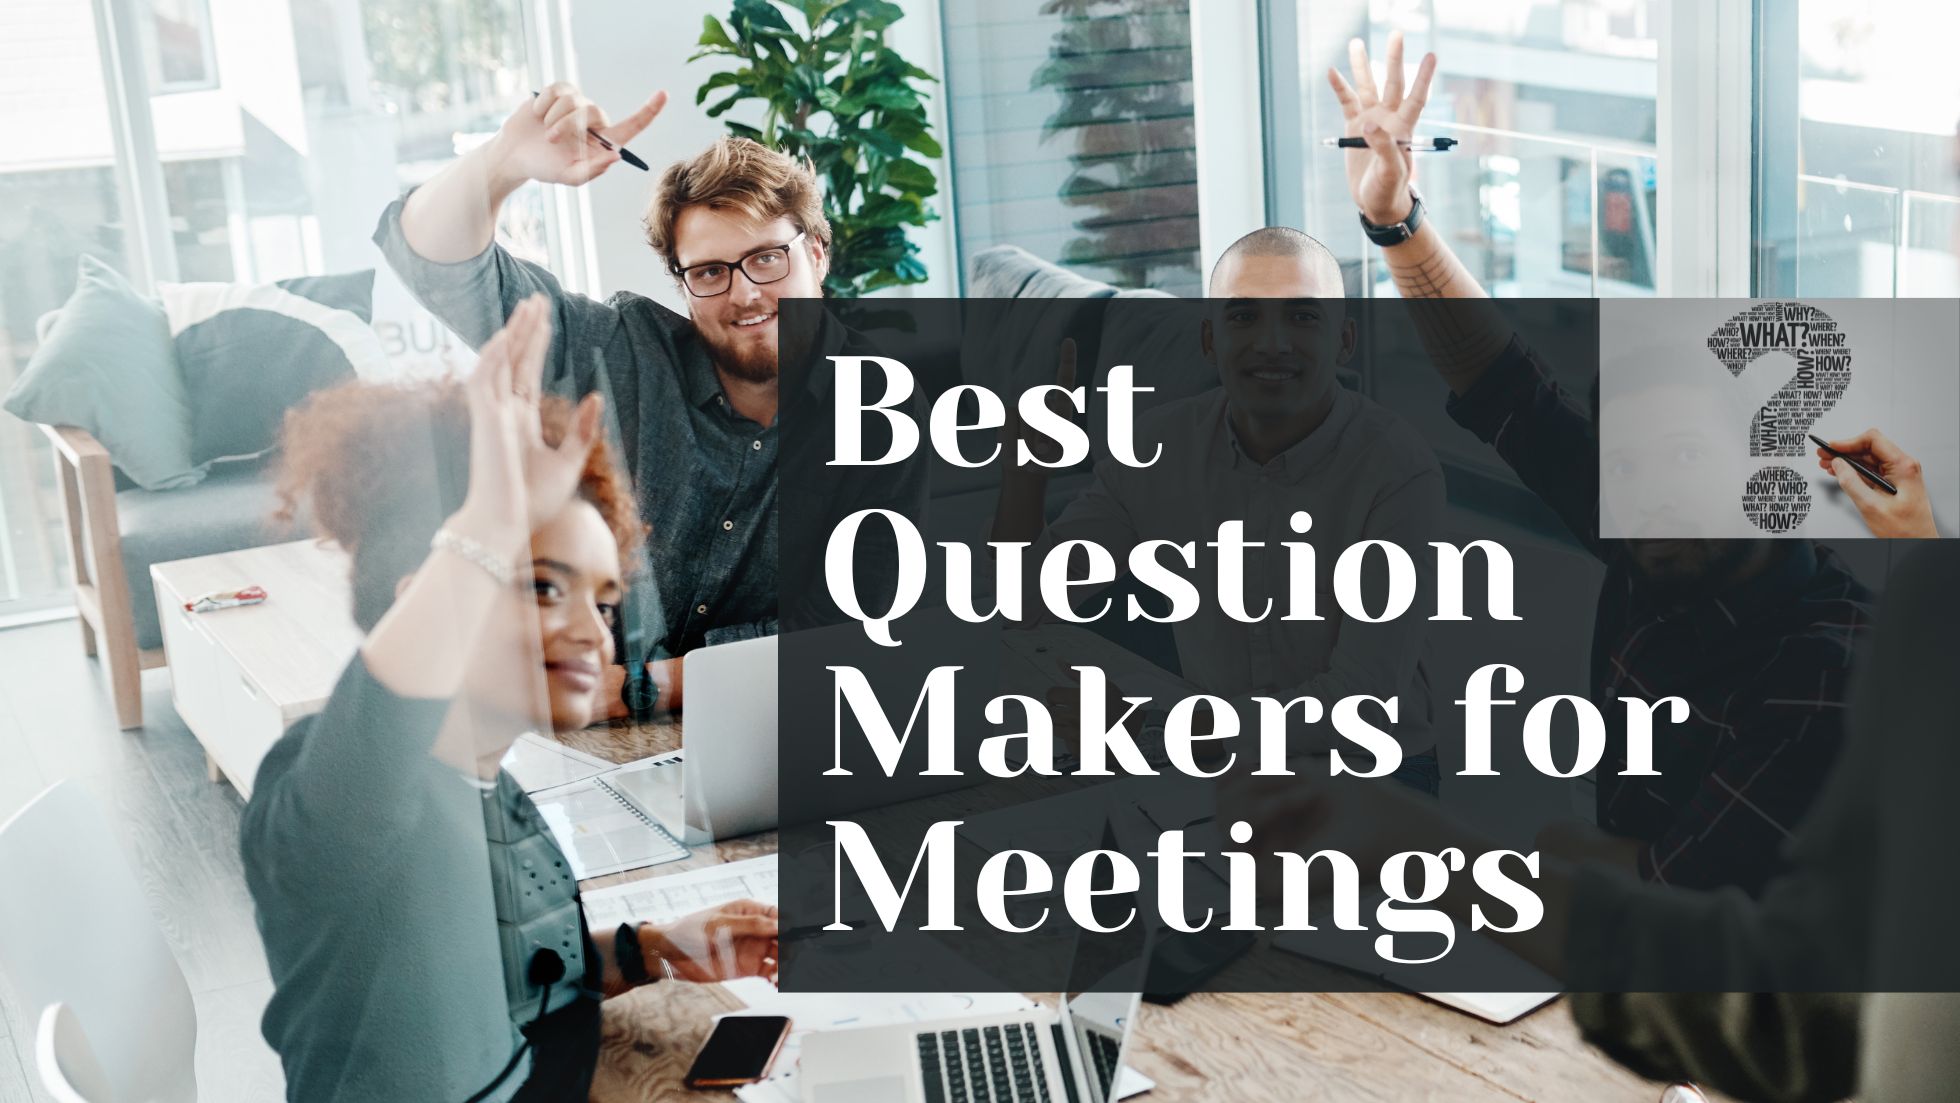 Best Question Makers for Meetings